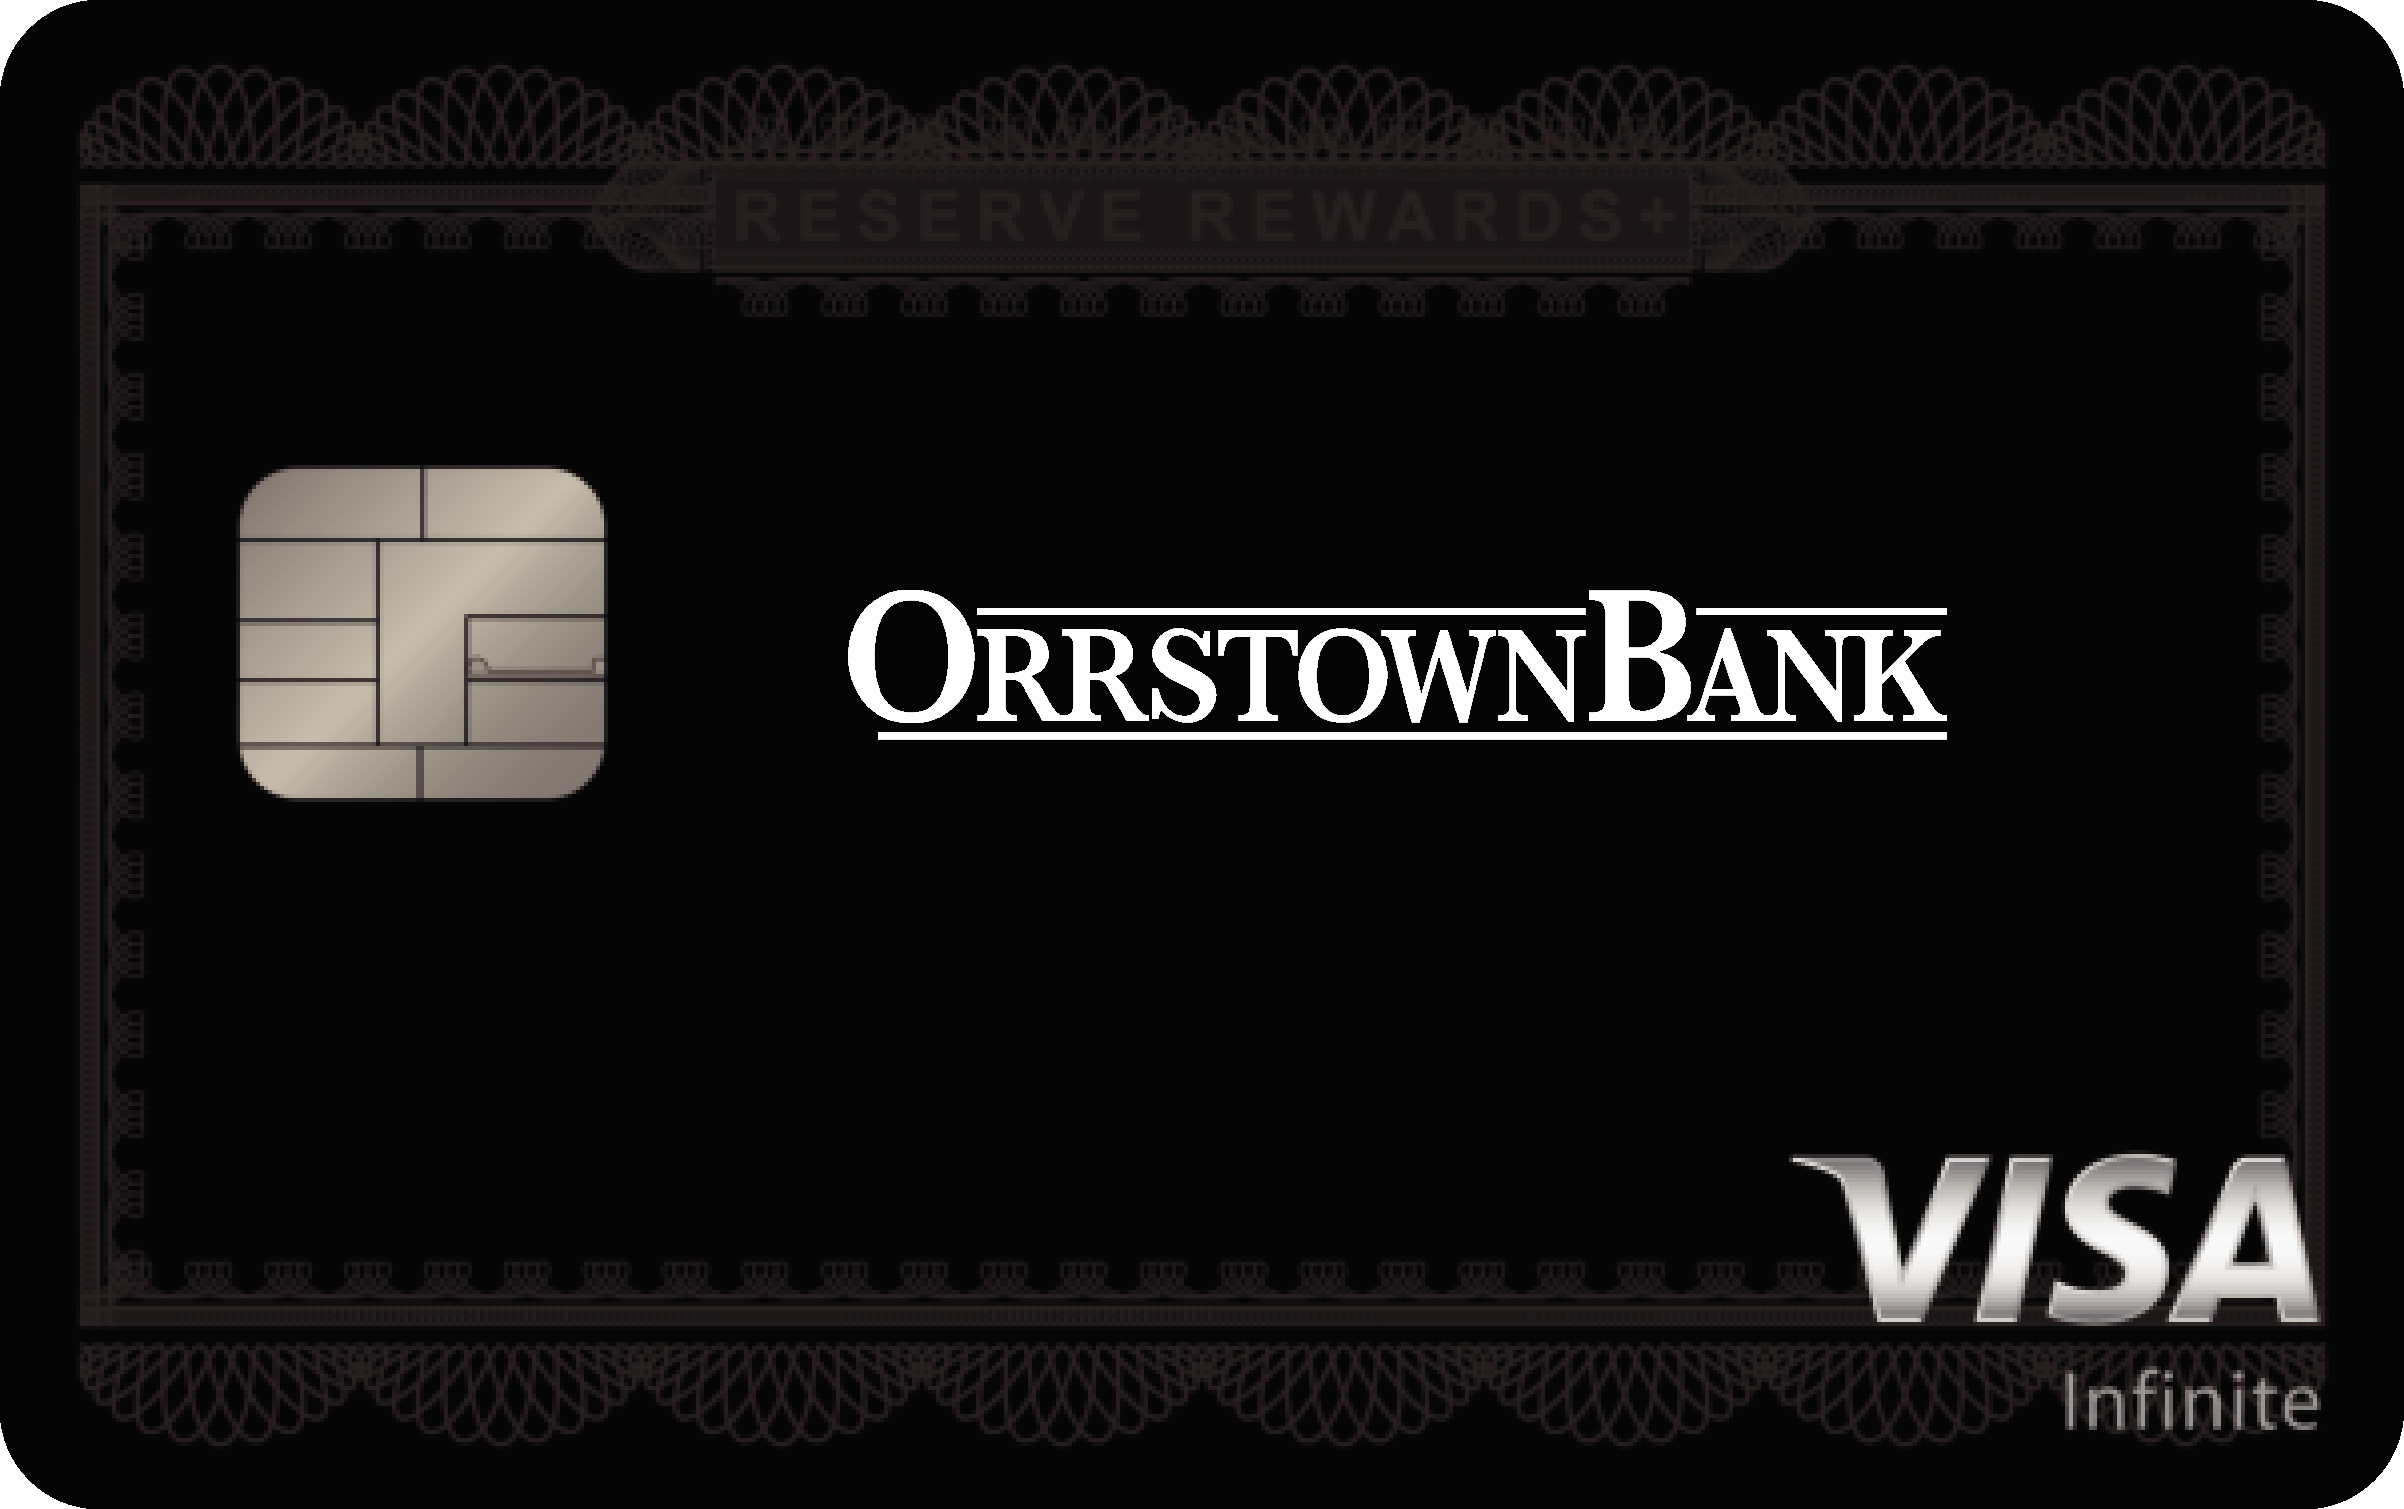 Orrstown Bank